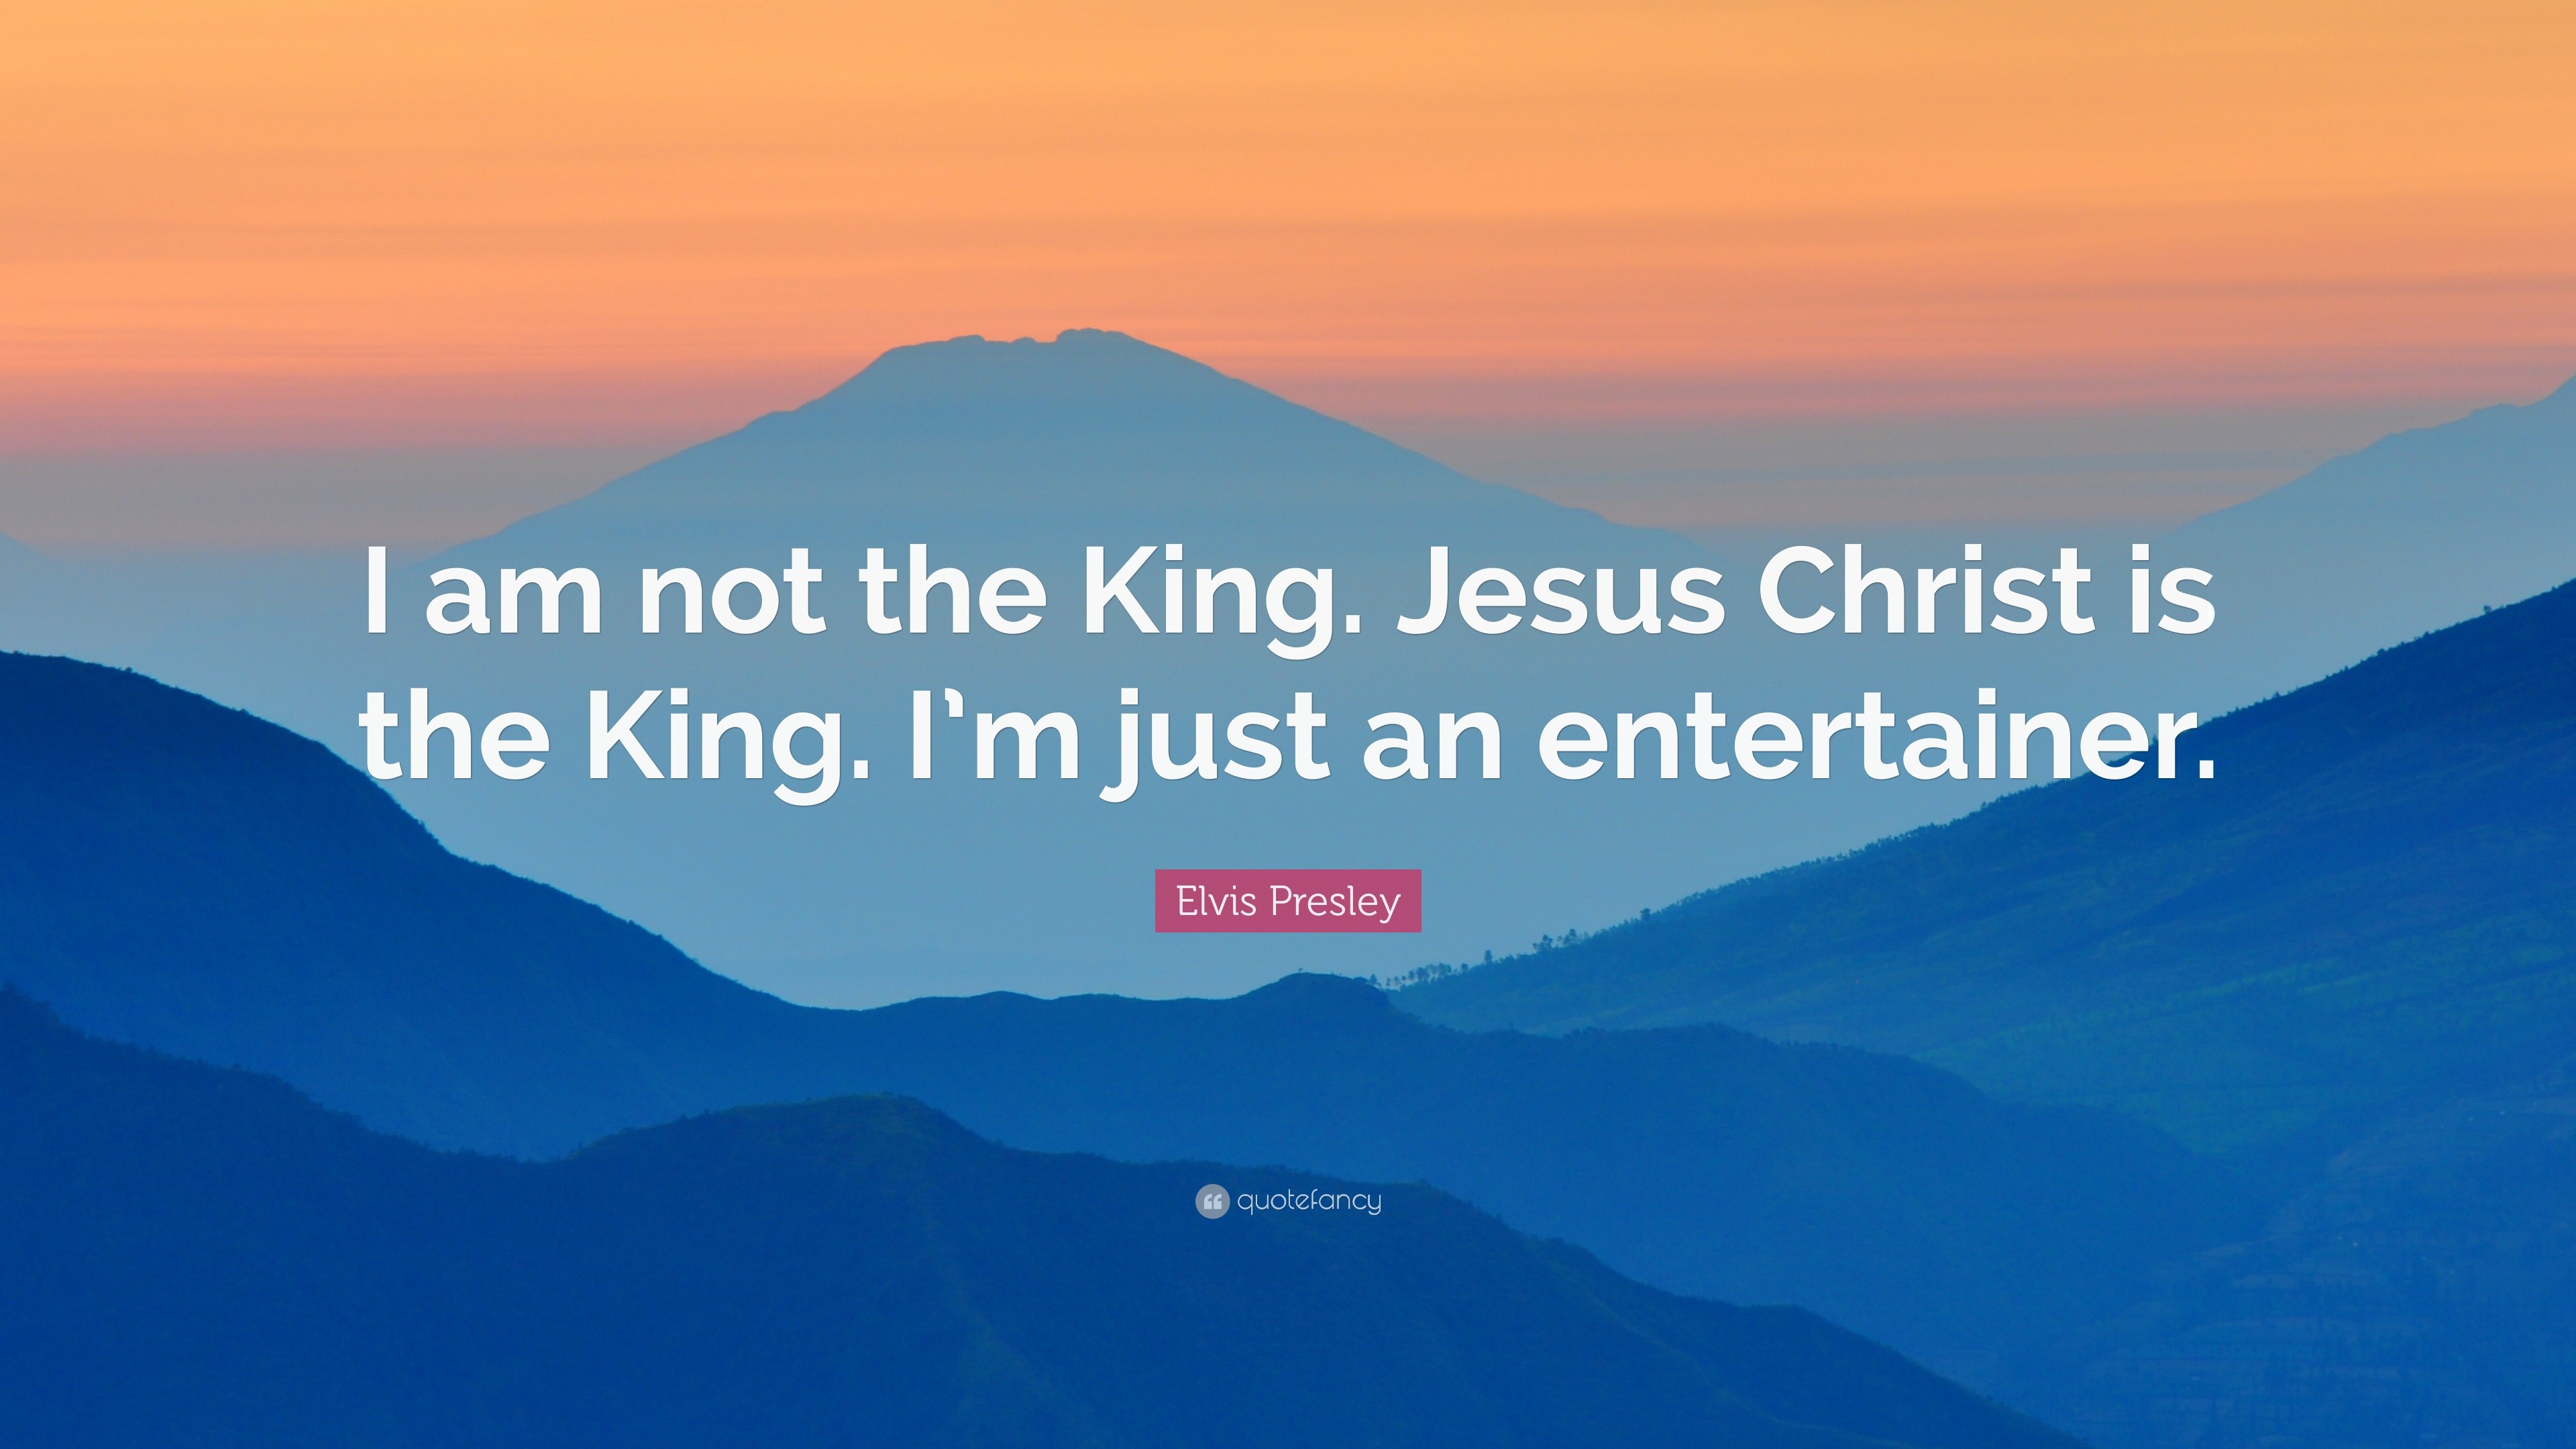 193715 Elvis Presley Quote I am not the King Jesus Christ is the King I m